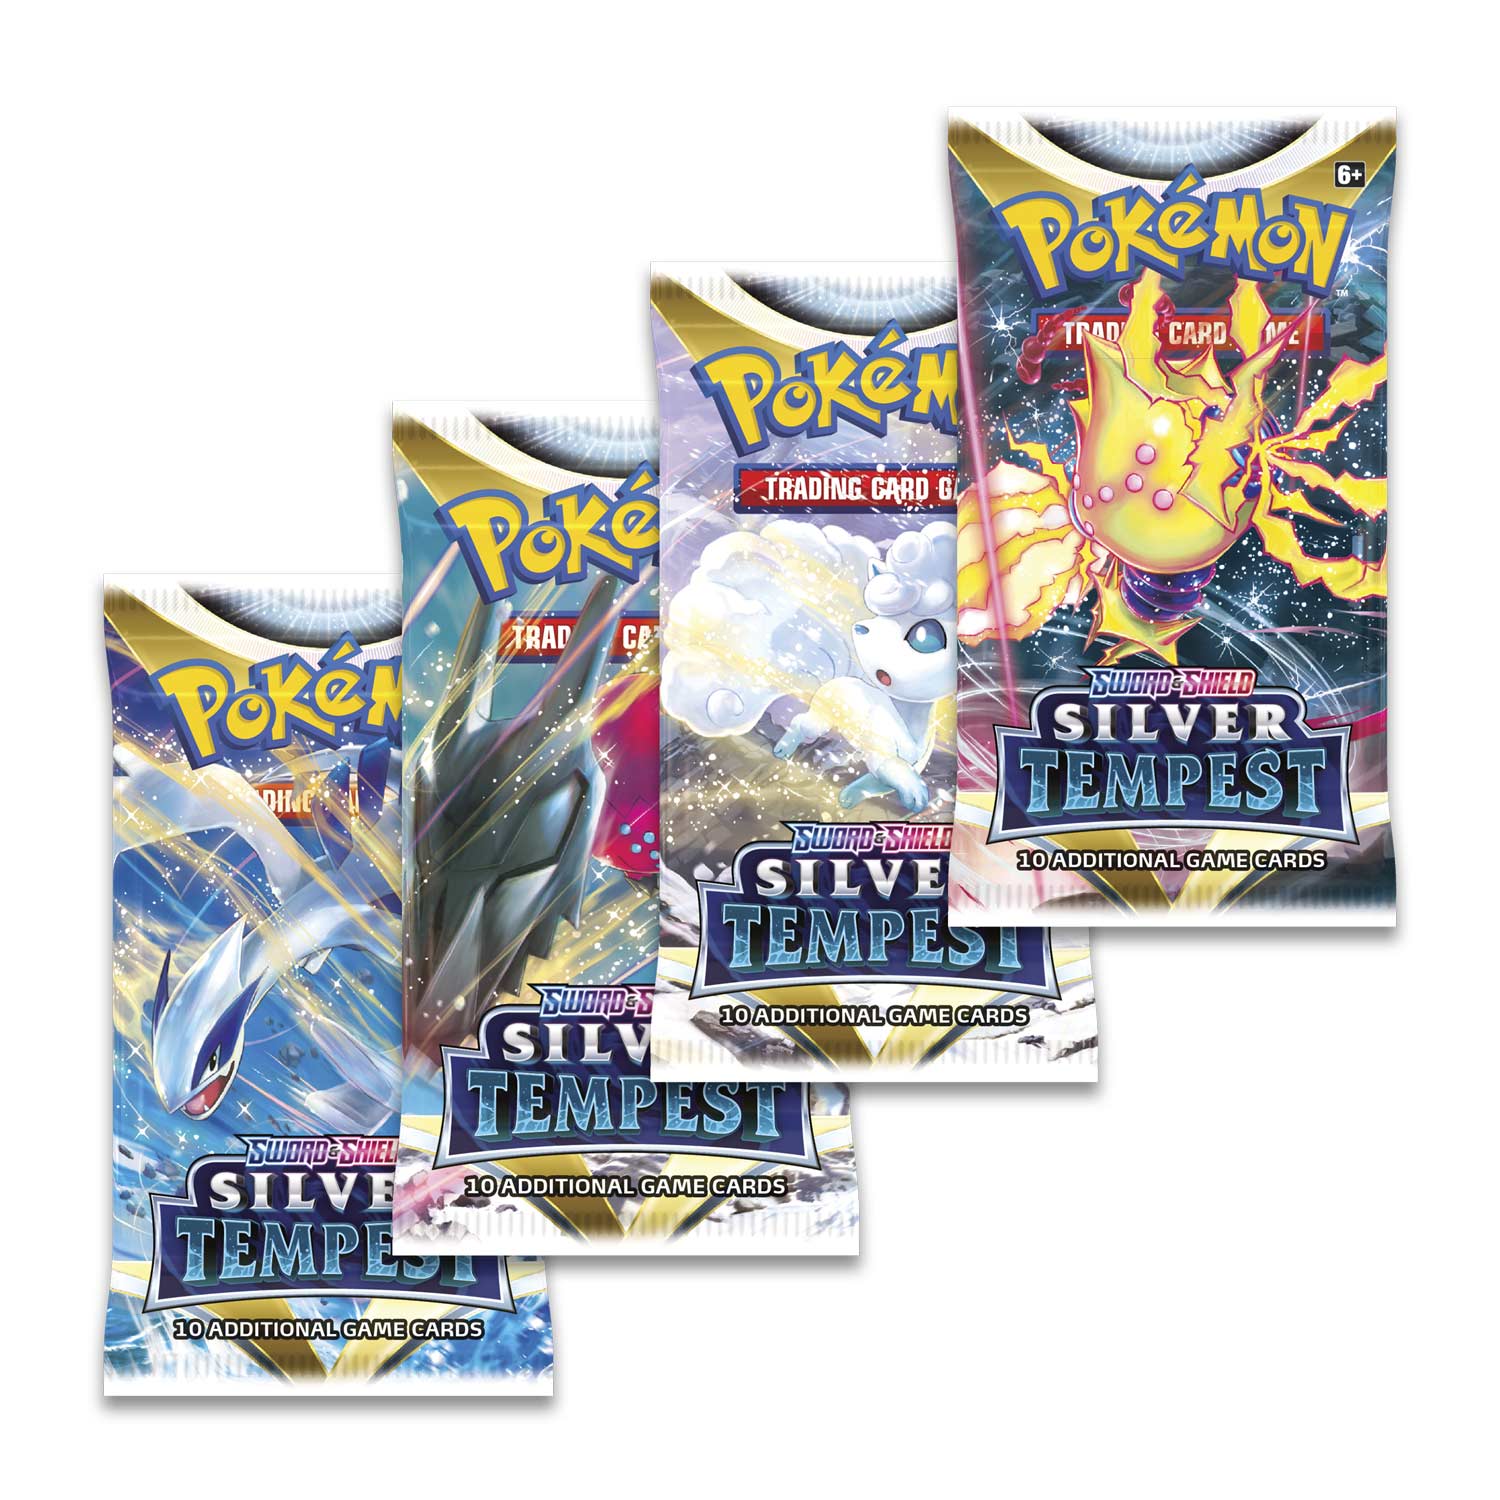 The One Stop Shop Comics & Games Silver Tempest - Booster Pack Pokemon